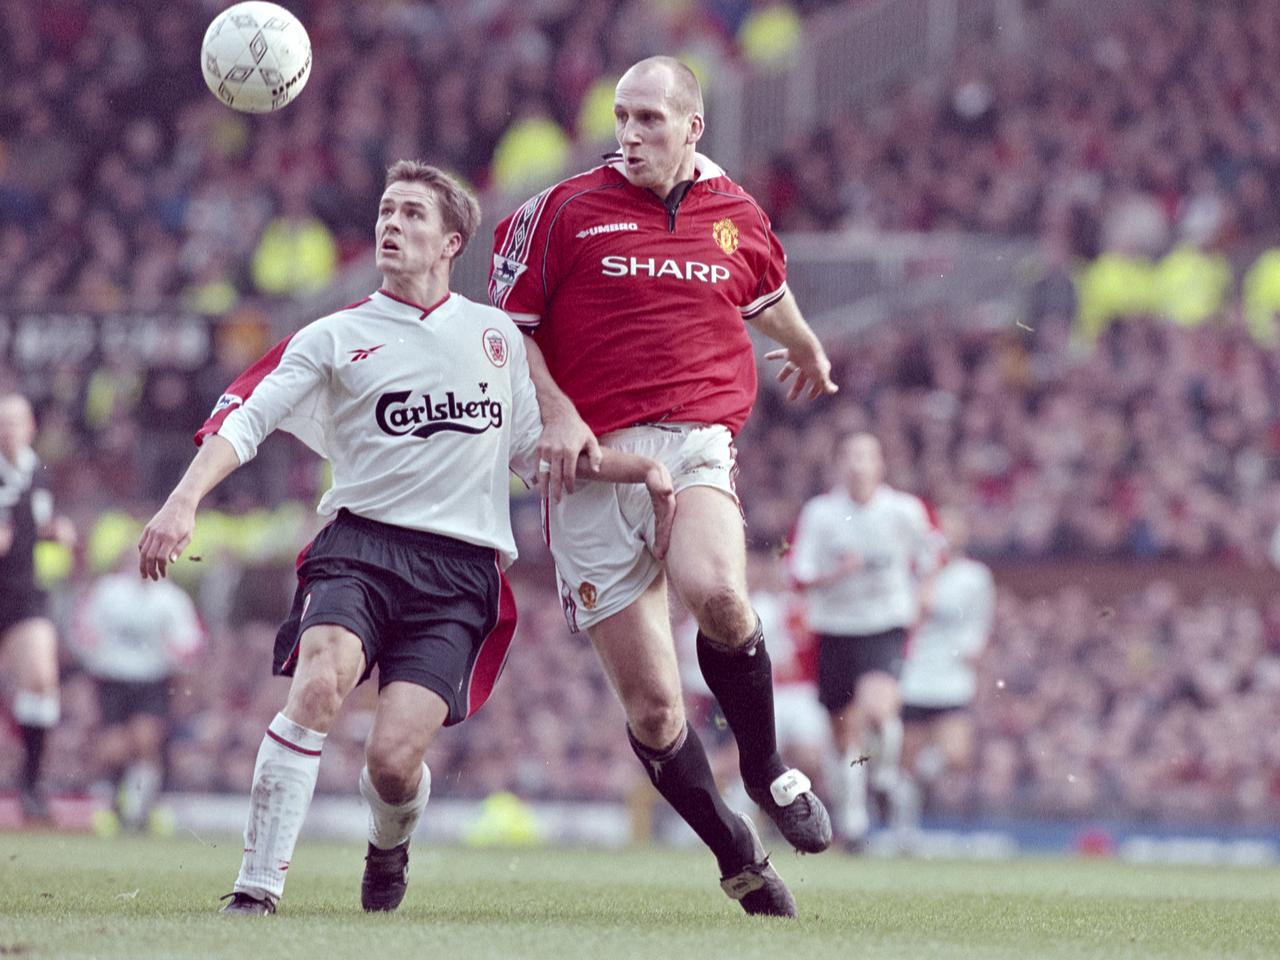 The story of Man Utd 2 Liverpool 1 1999 from the Impossible Treble |  Manchester United